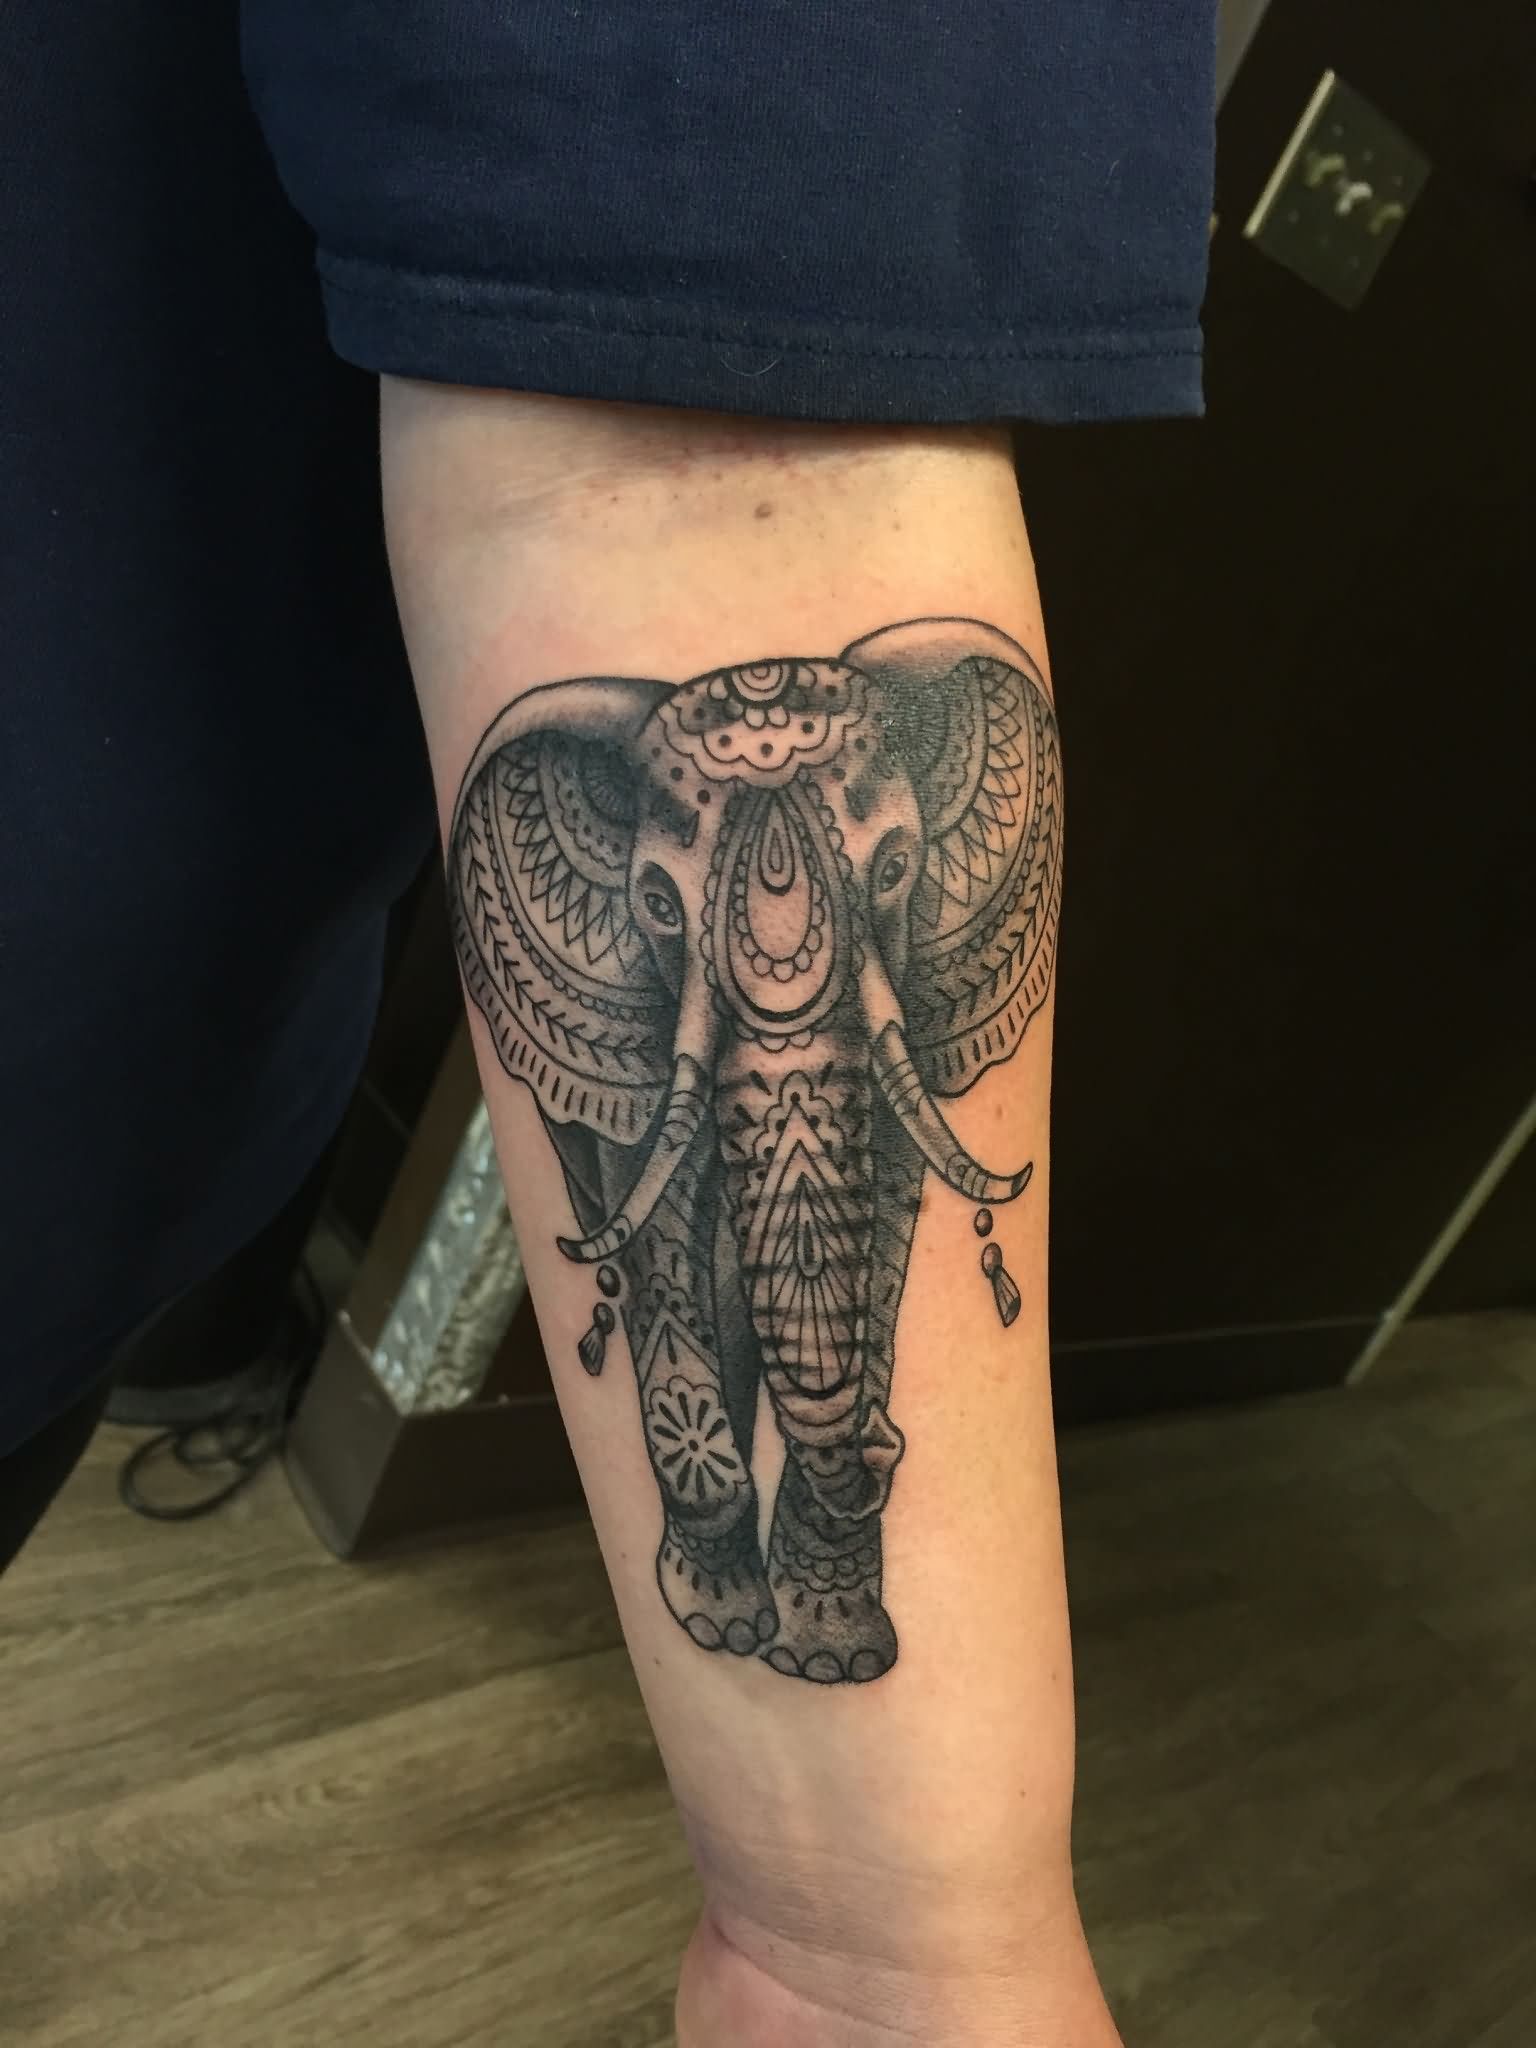 Awesome Black Ink Elephant Tattoo On Left Forearm By Daniel Troyer